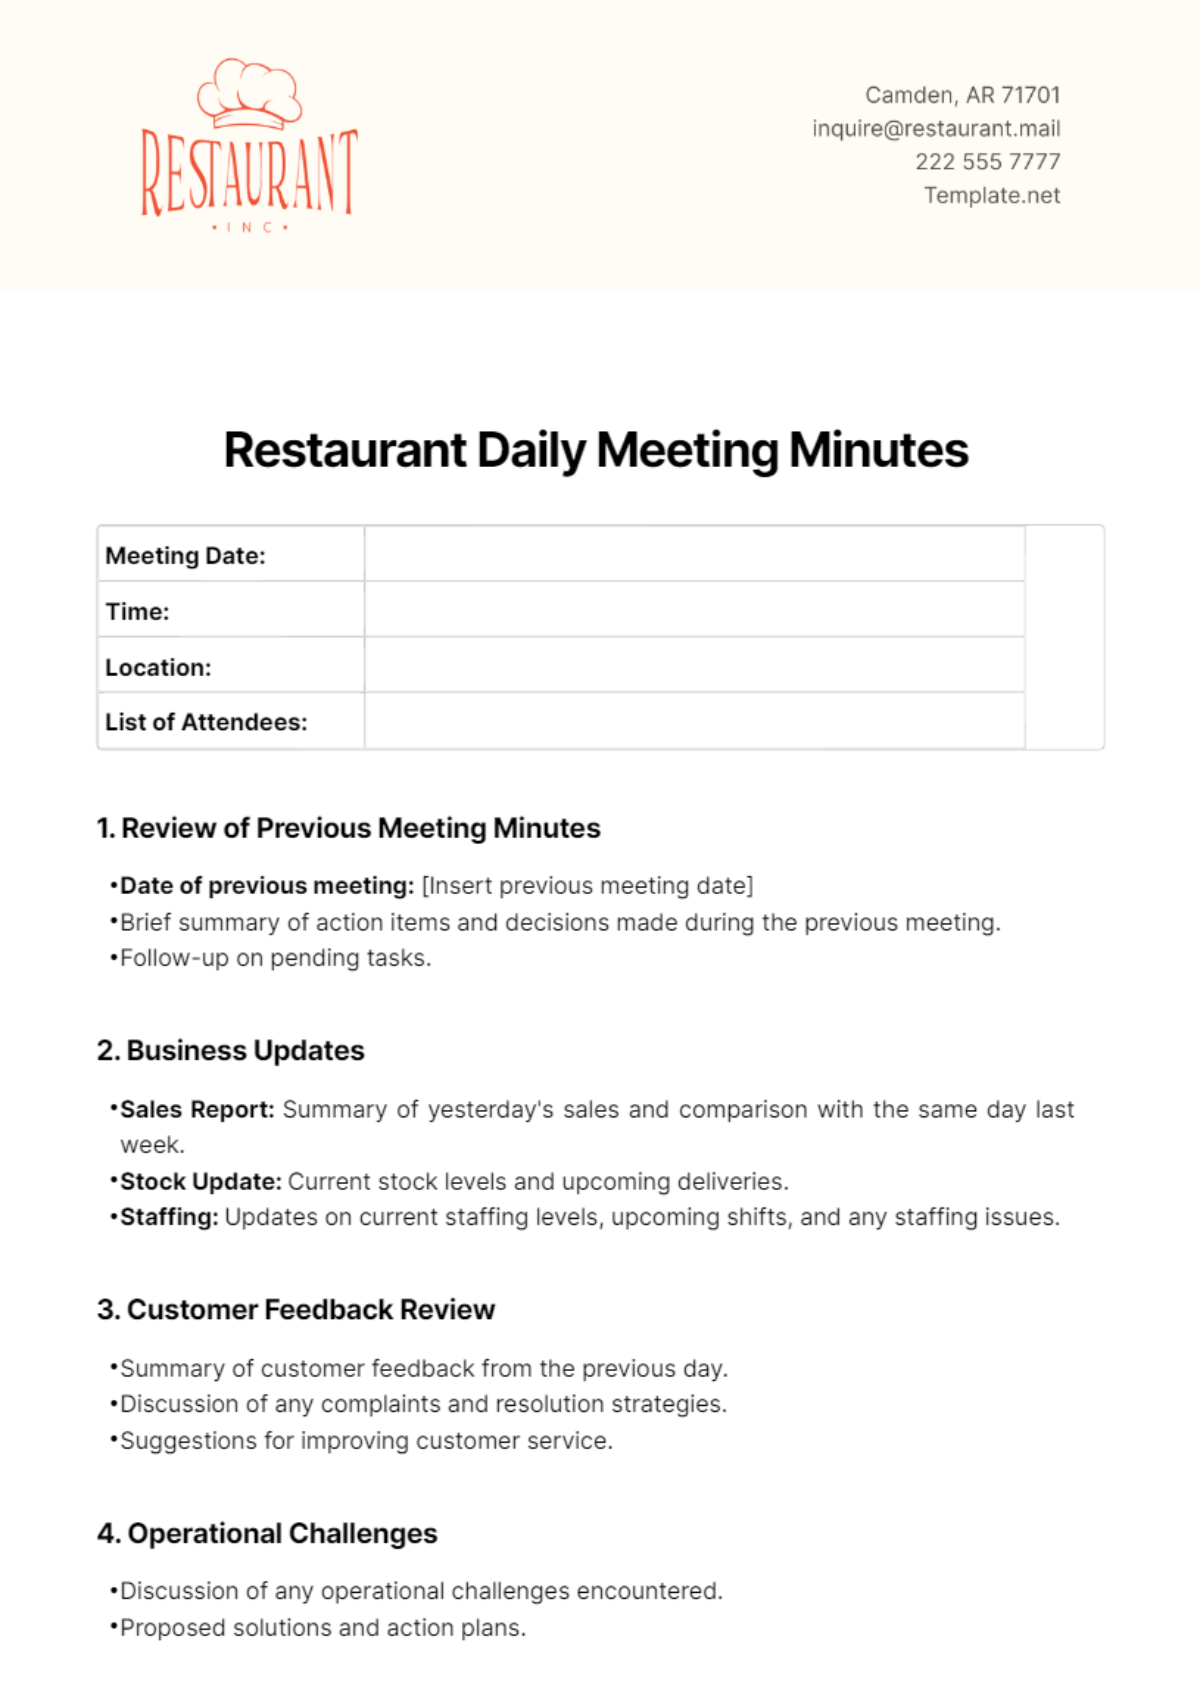 Restaurant Daily Meeting Minutes Template